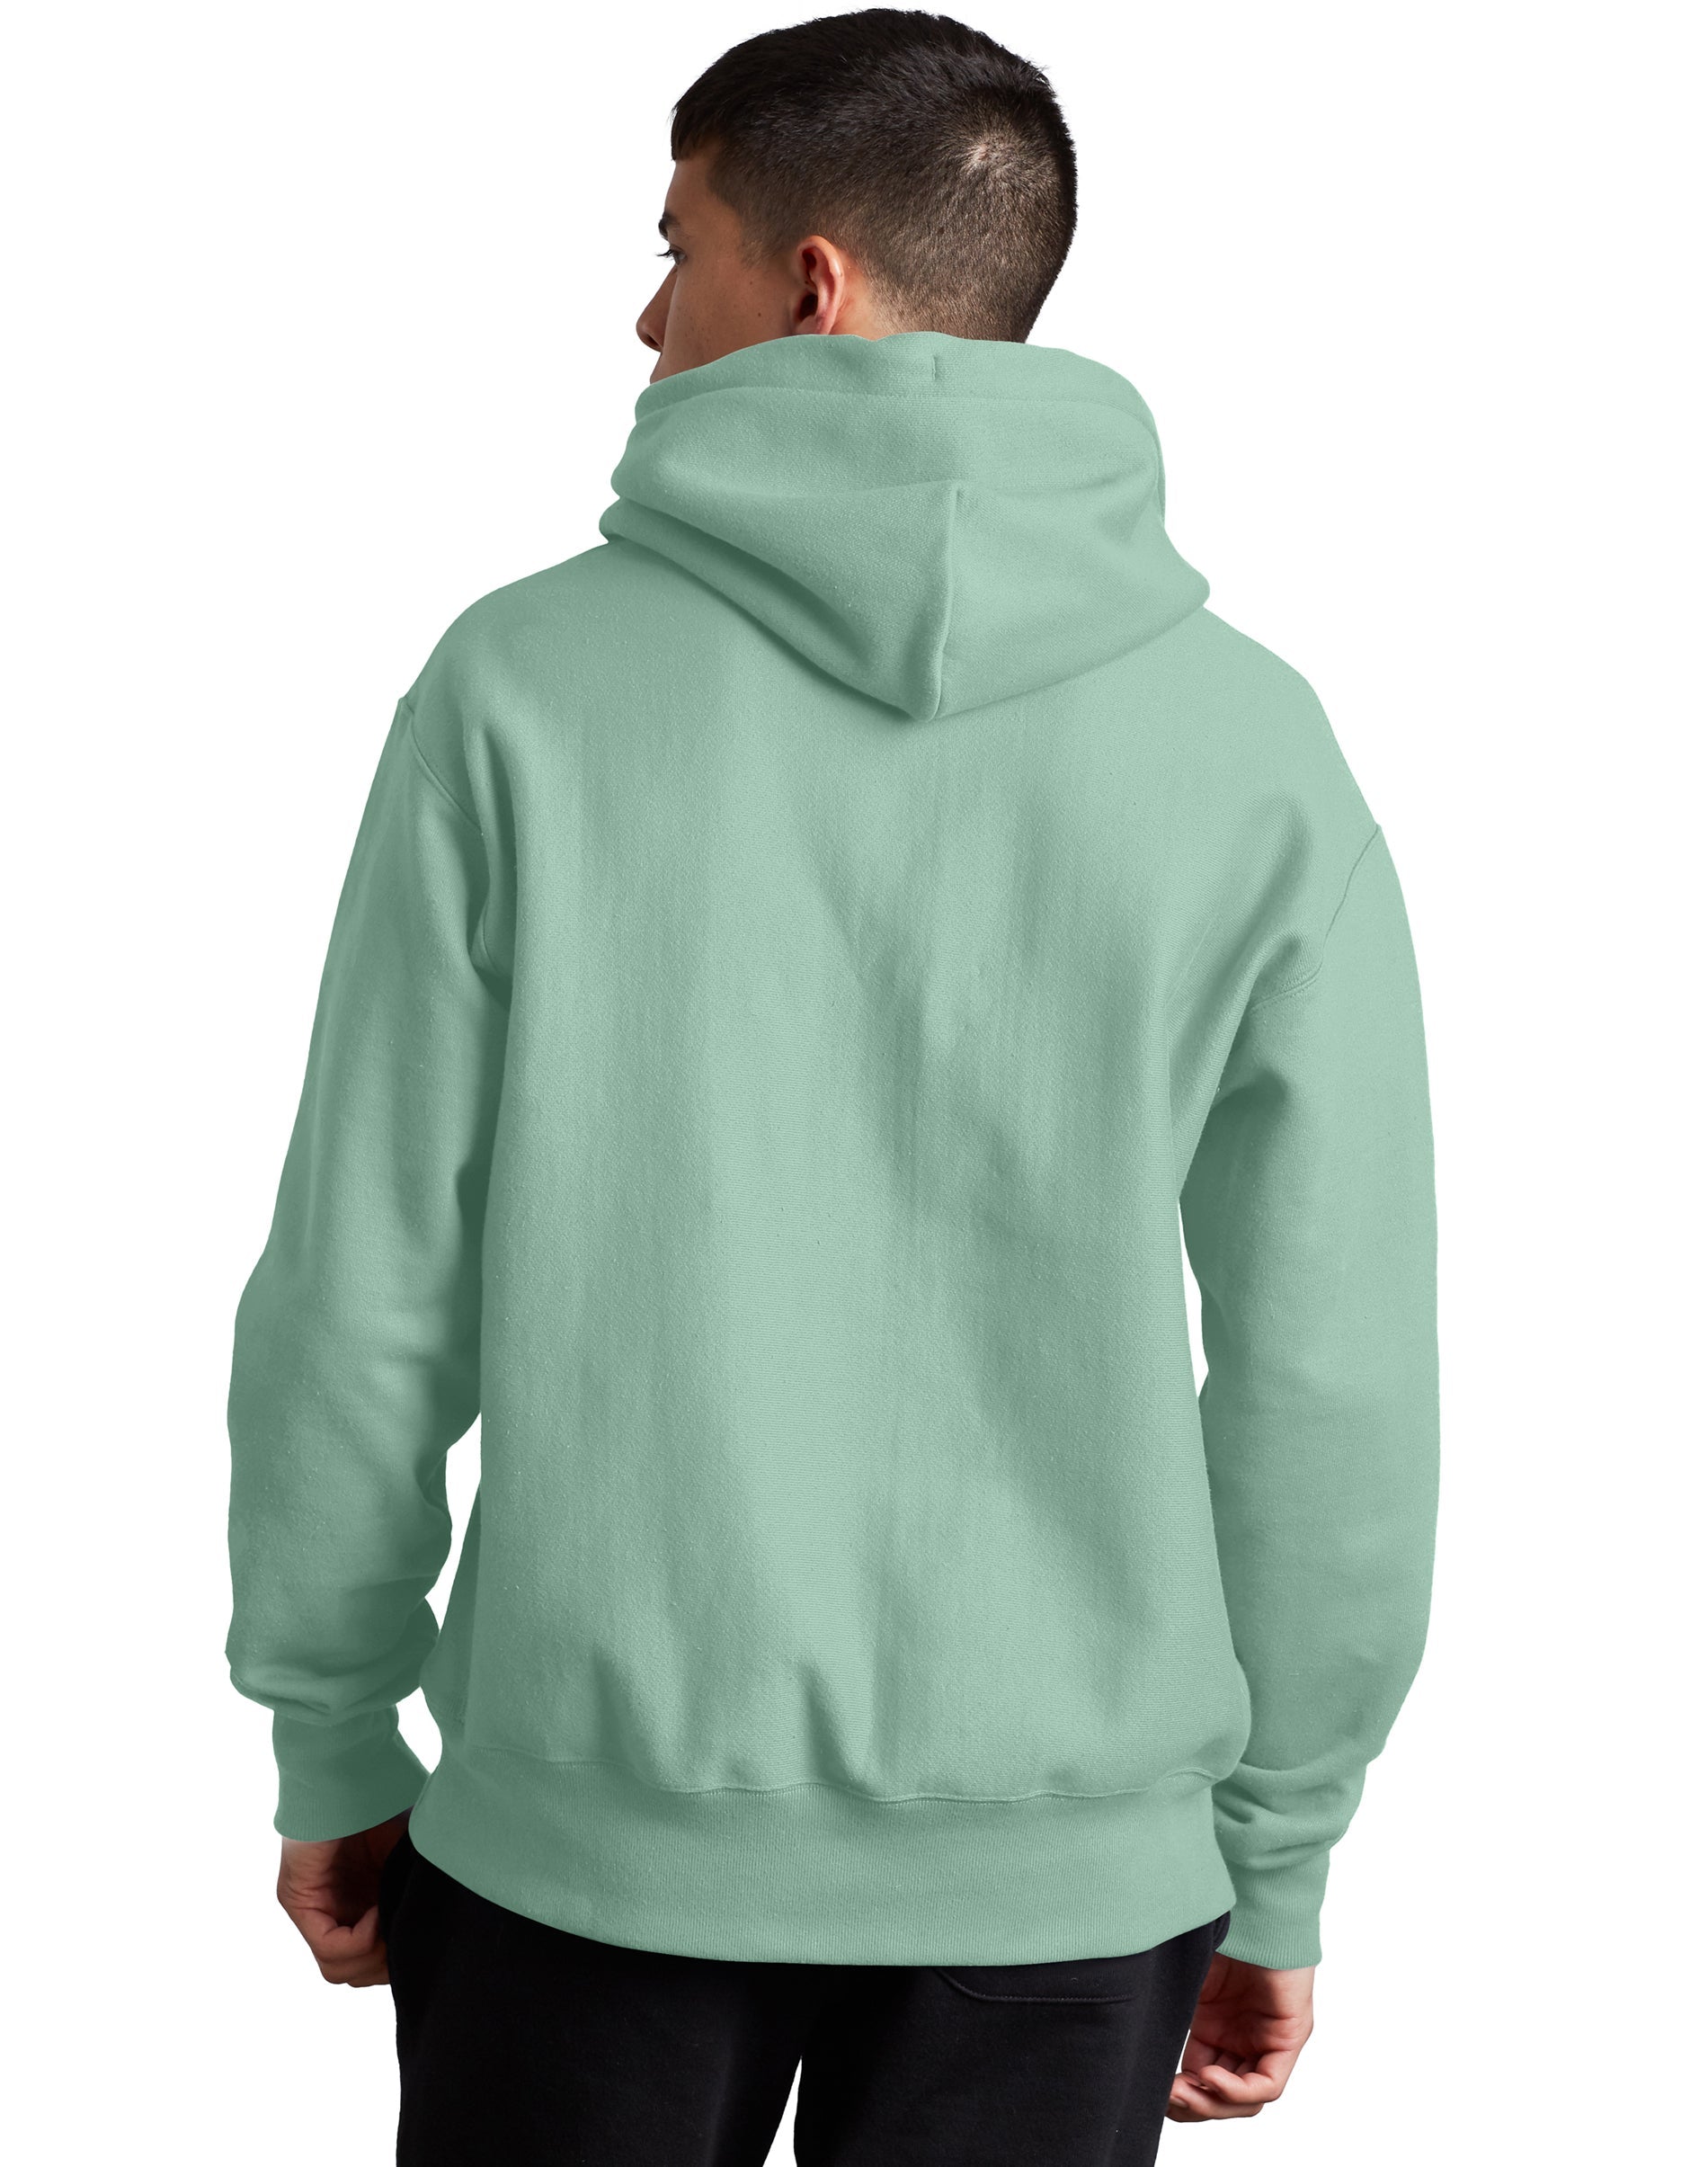 champion reverse weave floss stitch c grey hoodie Cheap Sell - OFF 78%